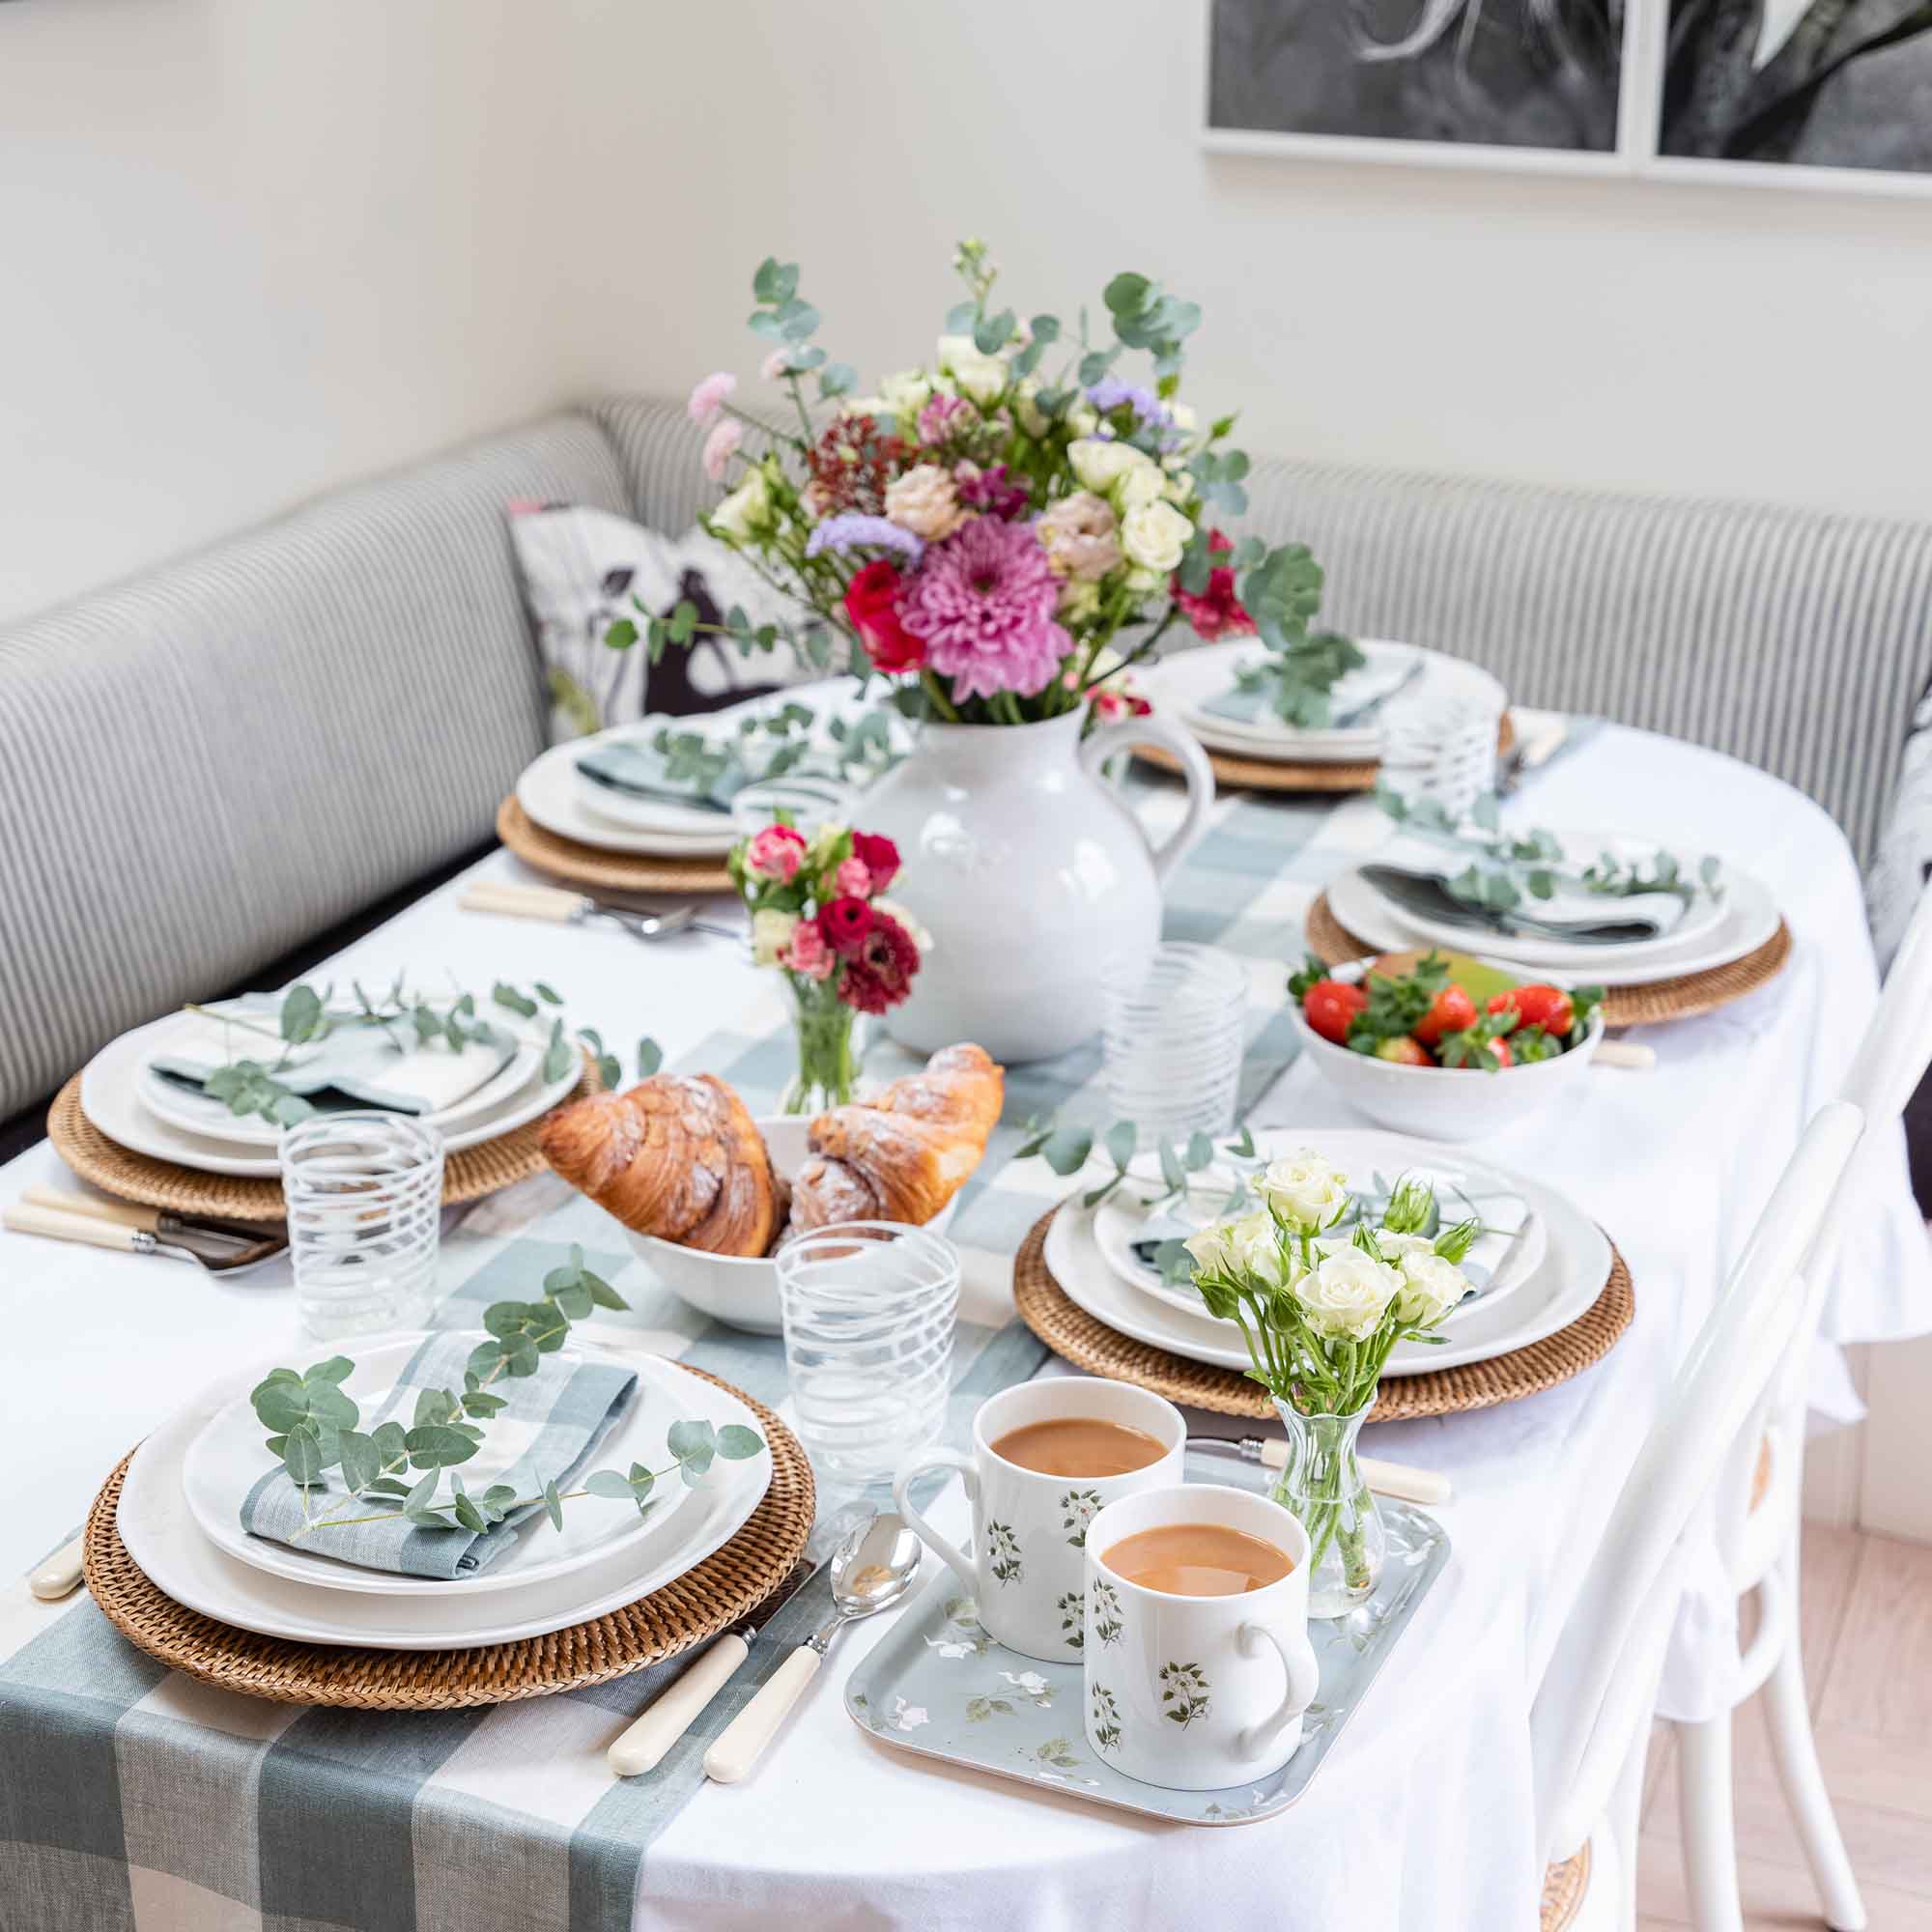 View of the table set for brunch with gingham table linens